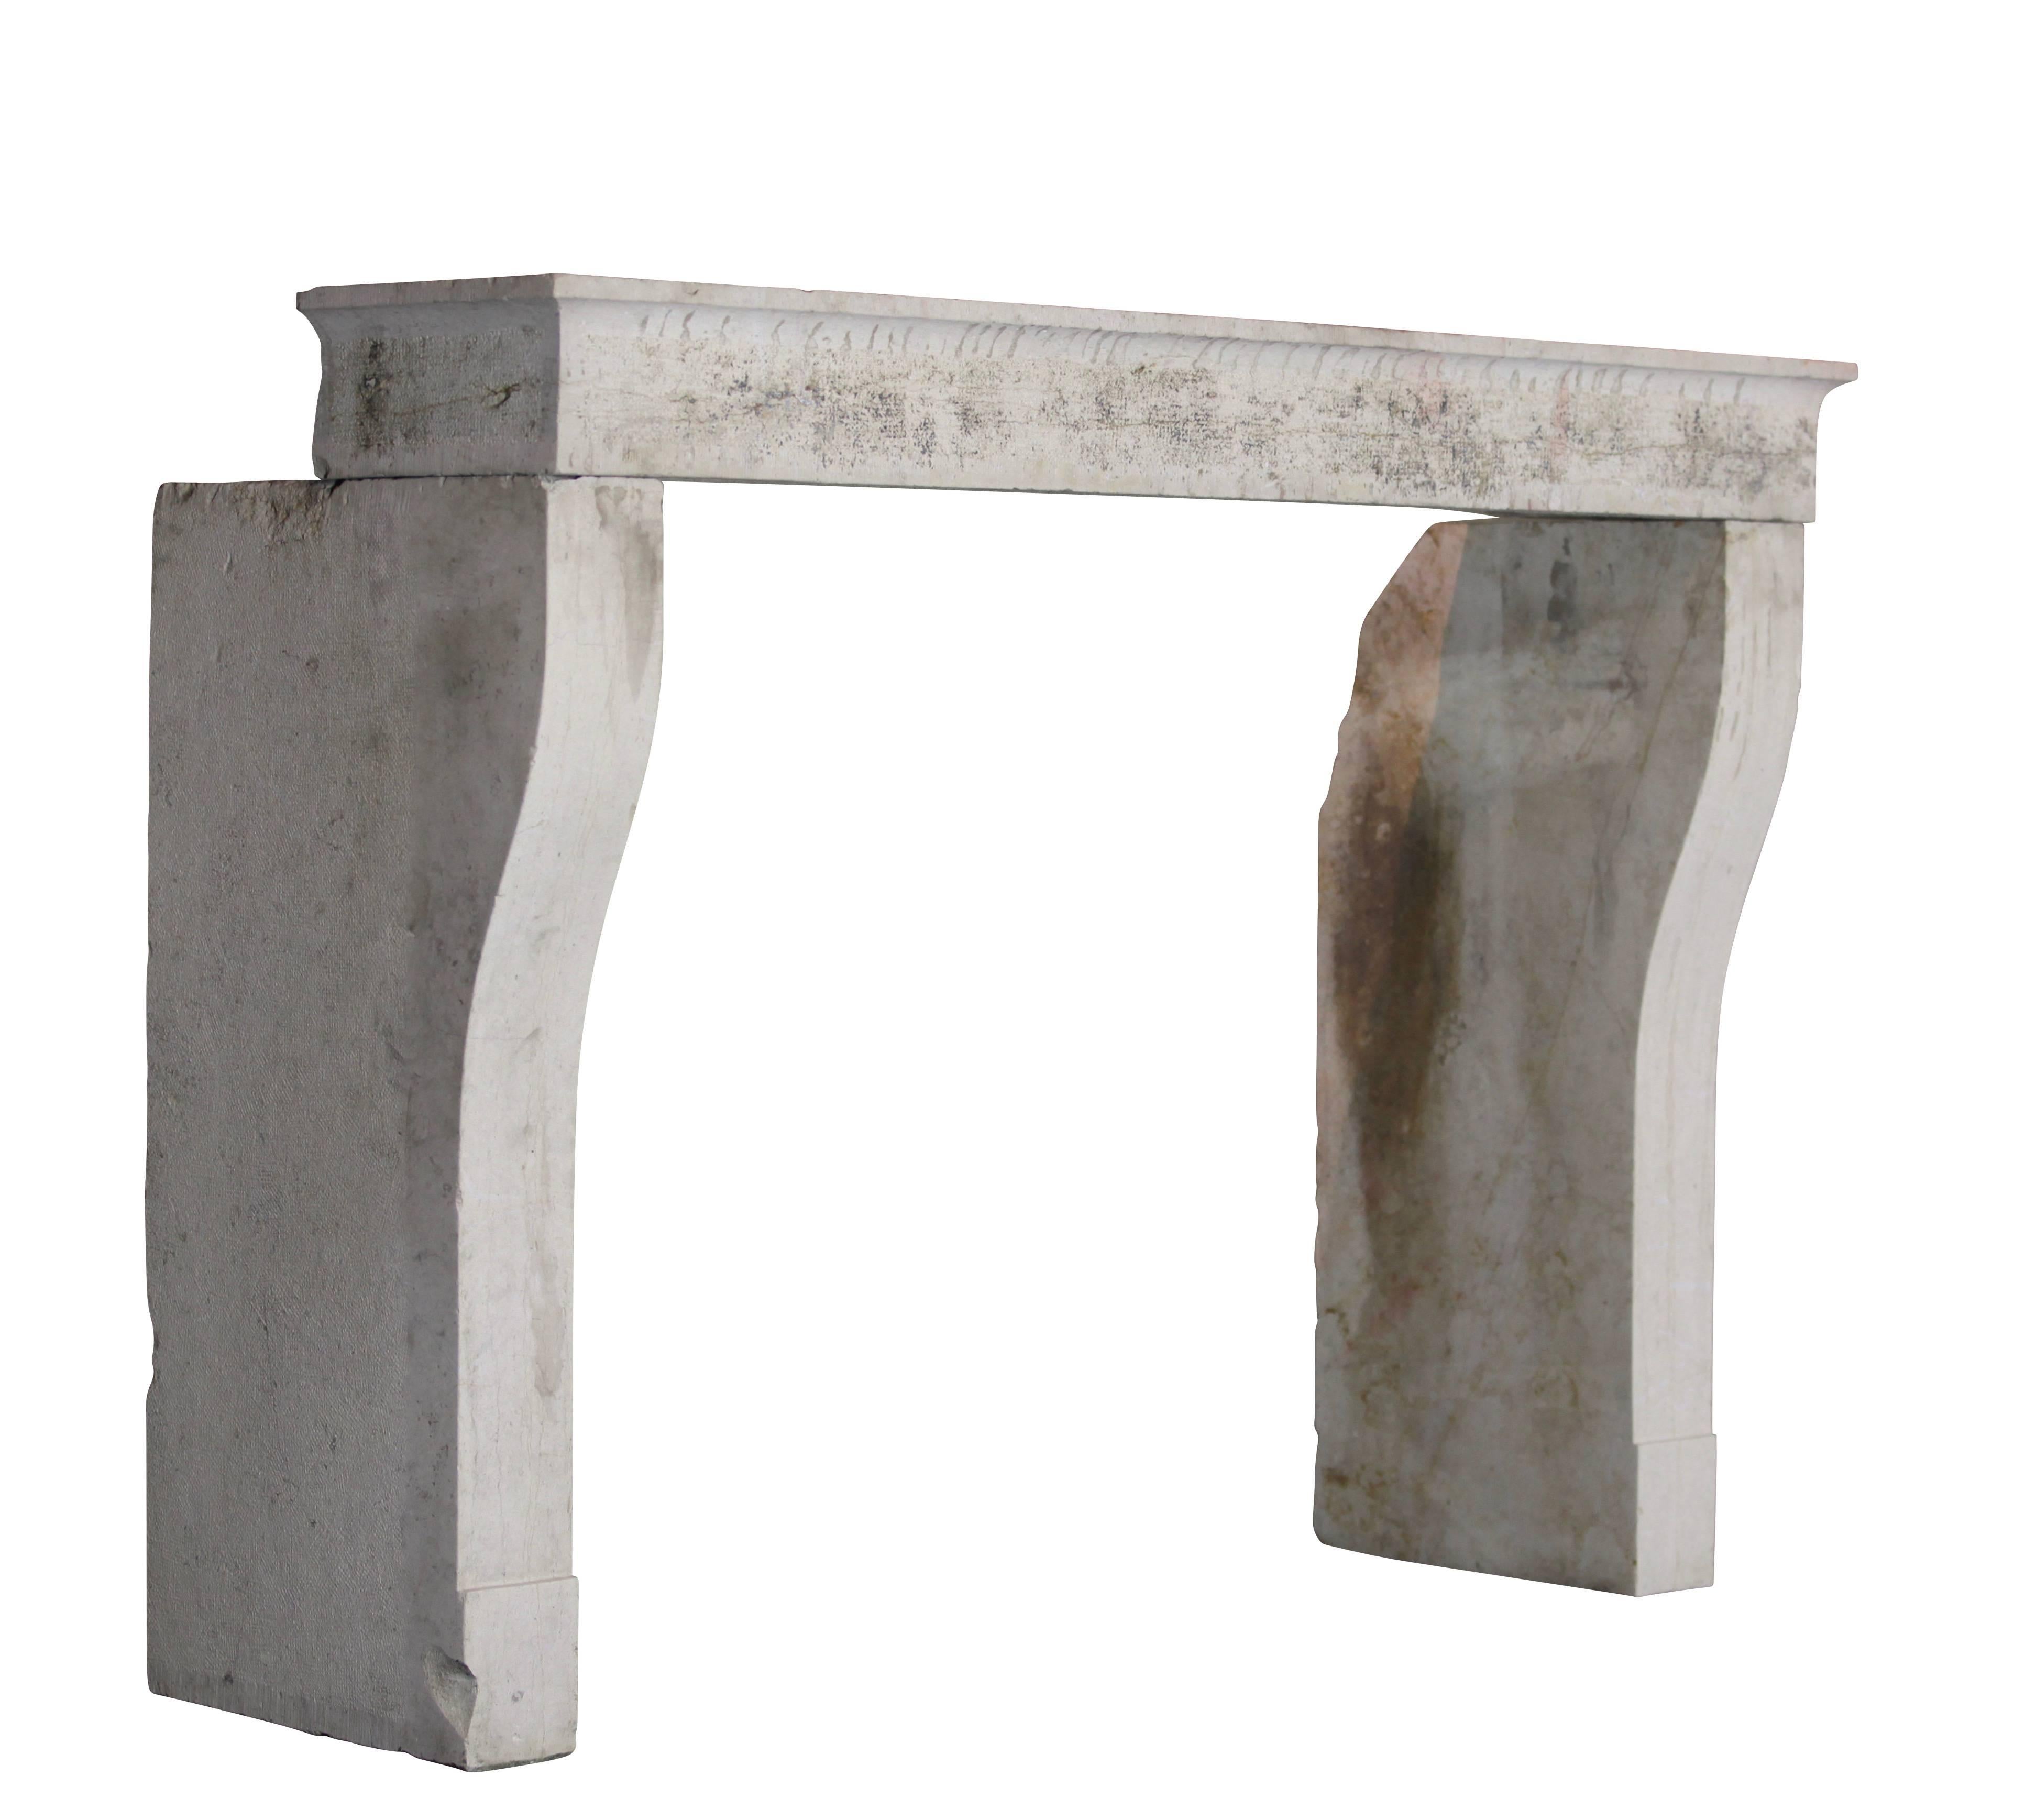 This antique fireplace surround is from a French country house in Burgundy. The hard stone looks like lime stone. All pieces have a very nice finish: remains of original patina, pointed and hammered. It was built in the Louis XIII period, 17th